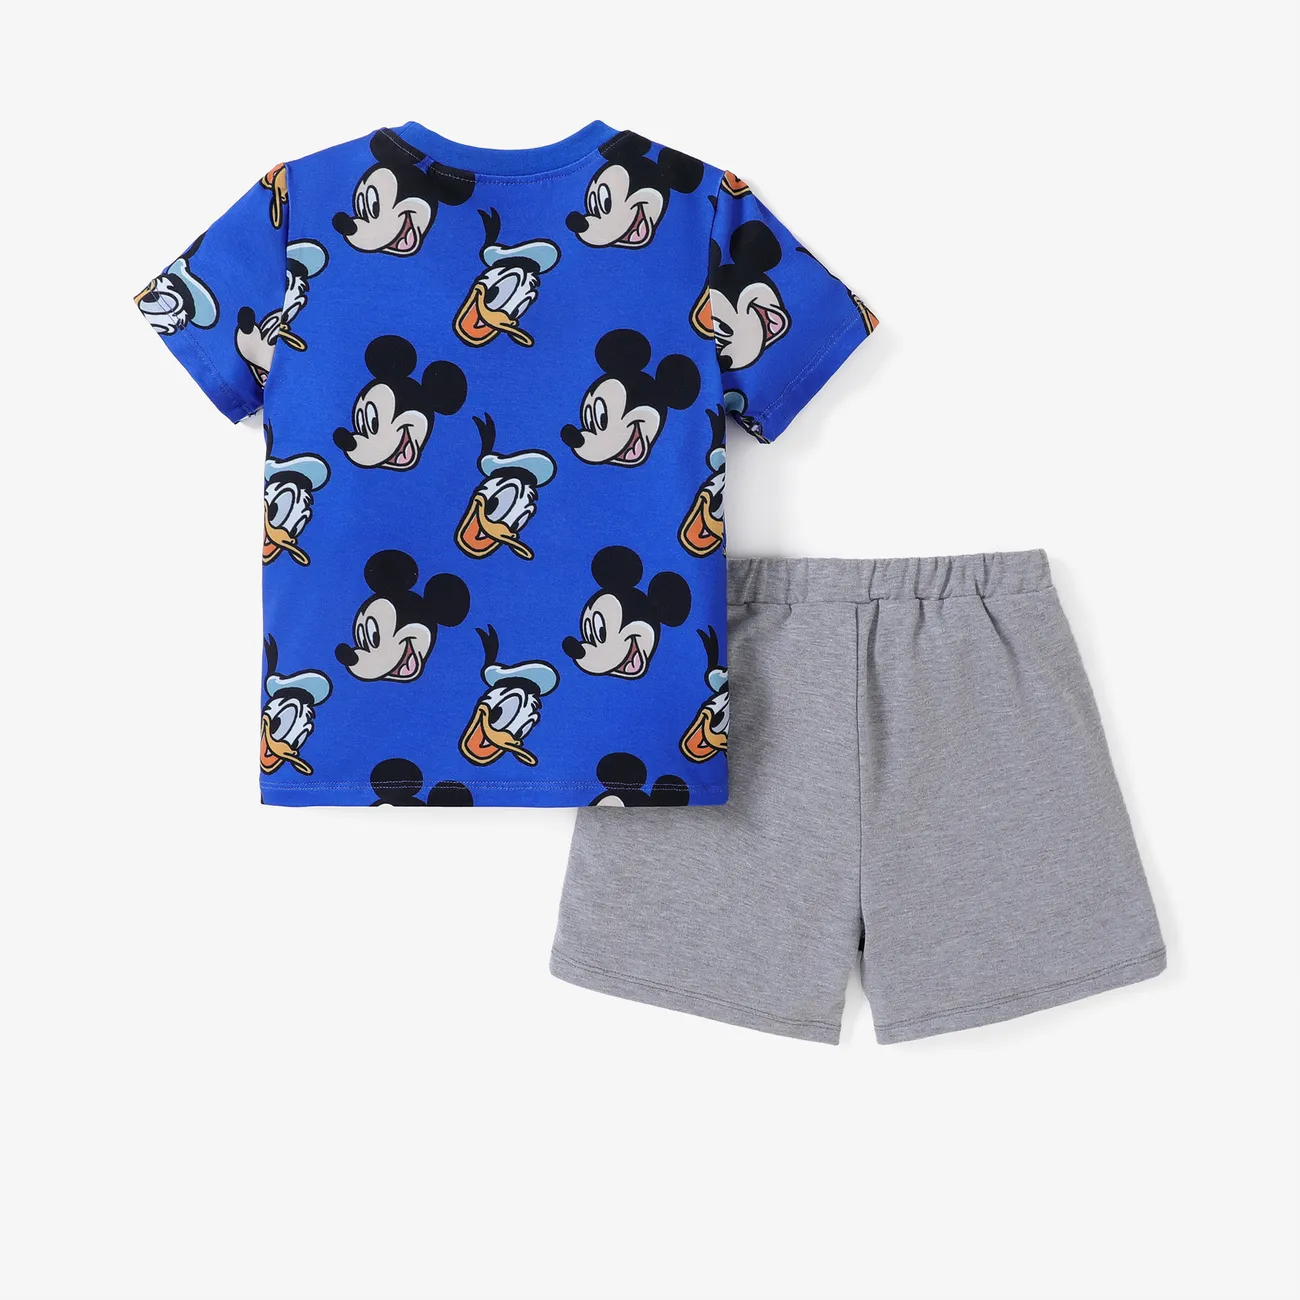 Disney Mickey and Friends 2pcs Toddler Boy/Girl Naia™ Character All-over Stripped Print Tee and Shorts Set Blue big image 1